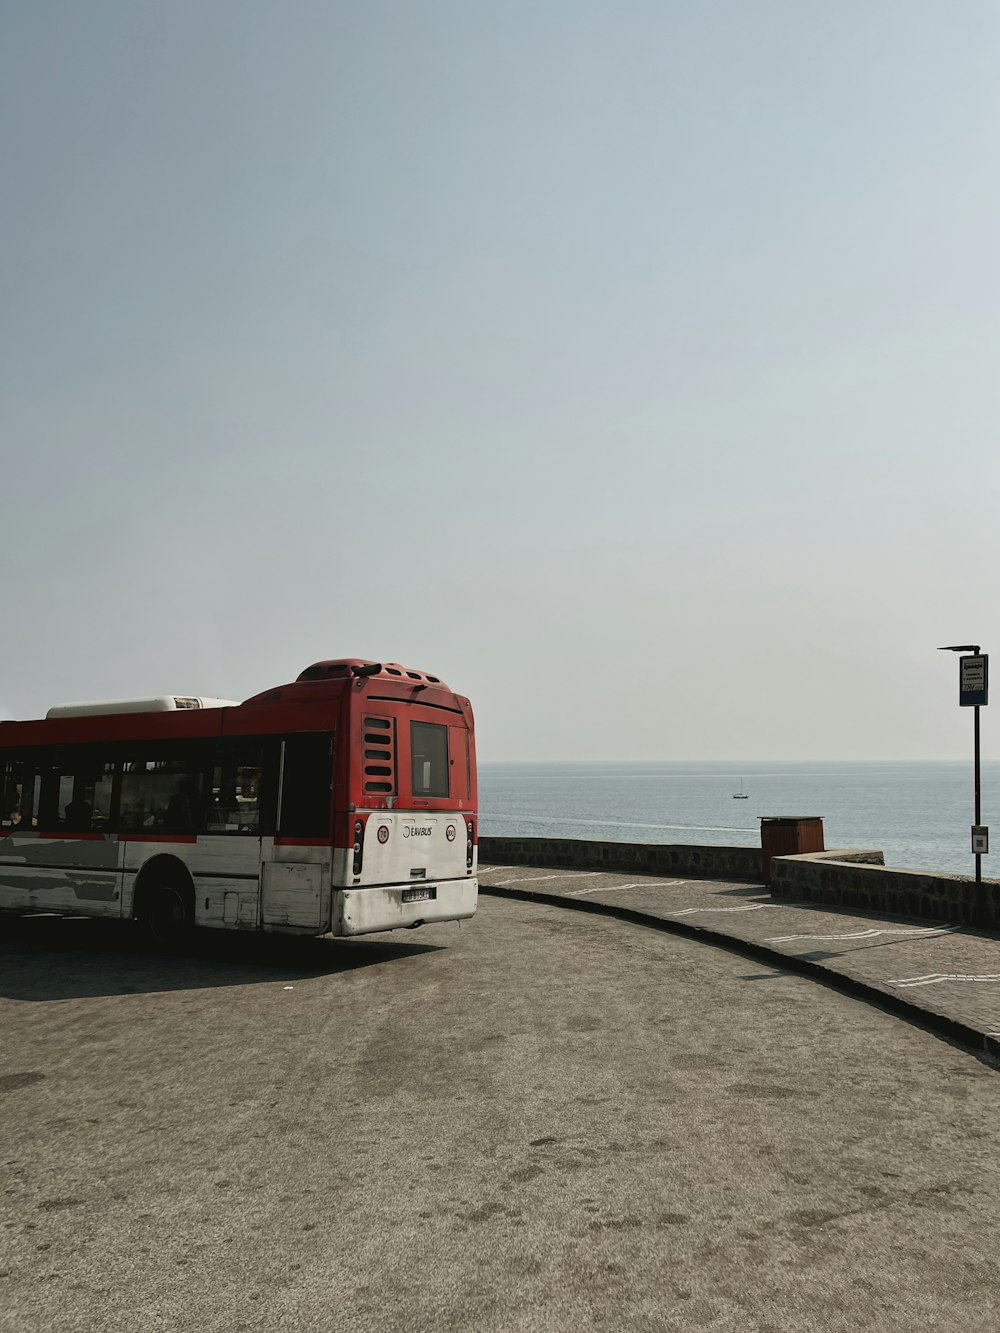 a red and white bus parked next to the ocean